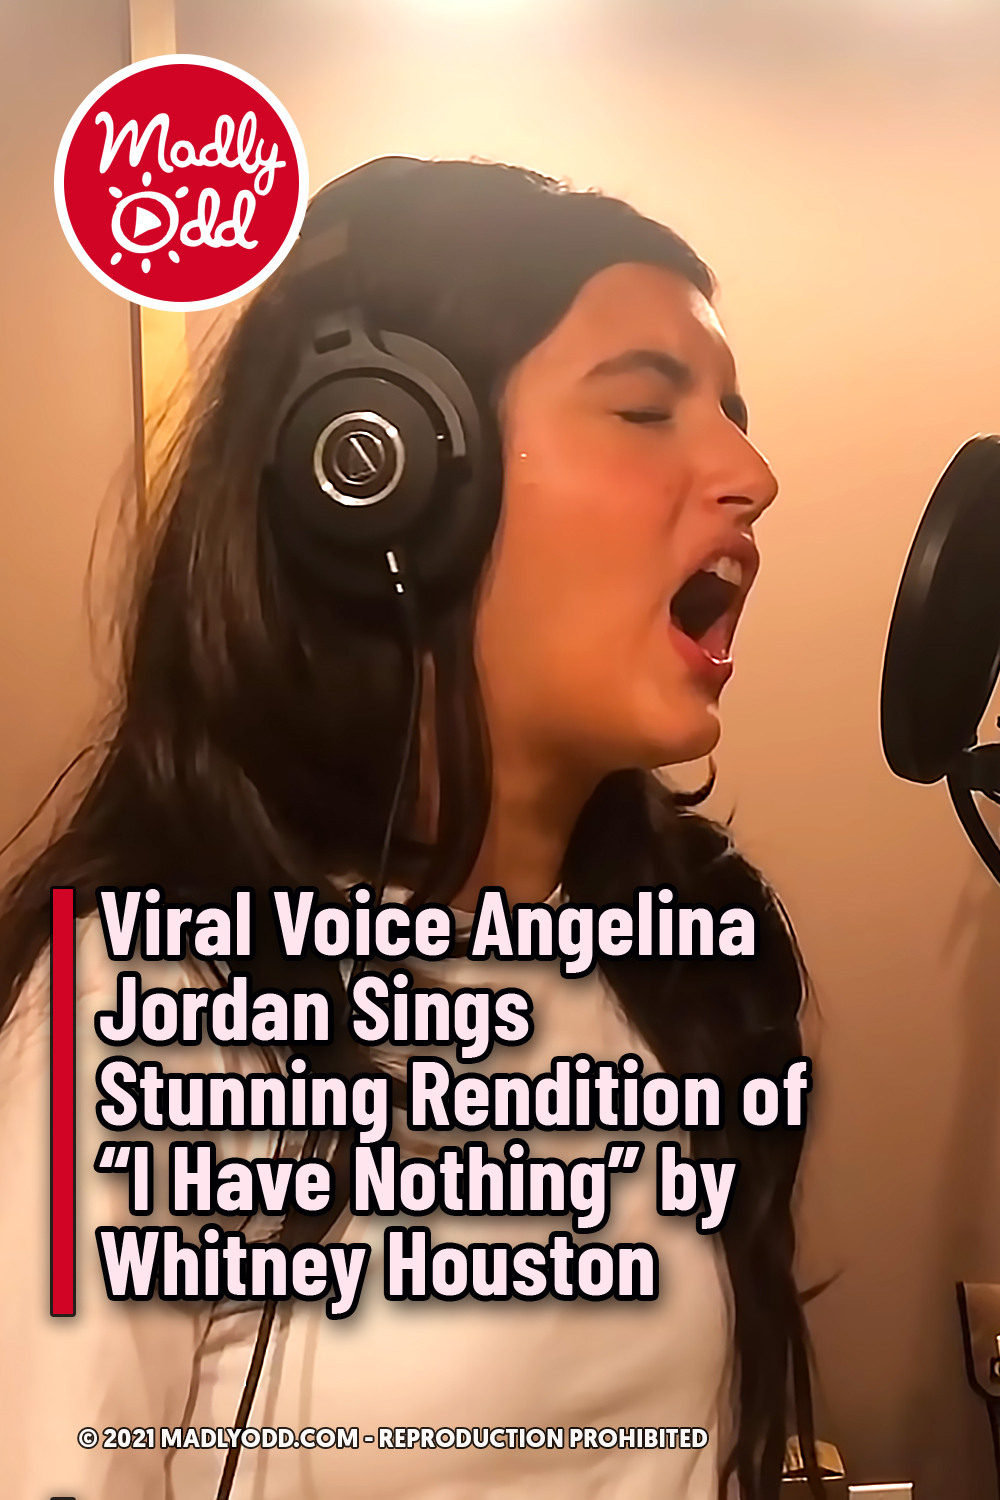 Viral Voice Angelina Jordan Sings Stunning Rendition of “I Have Nothing” by Whitney Houston